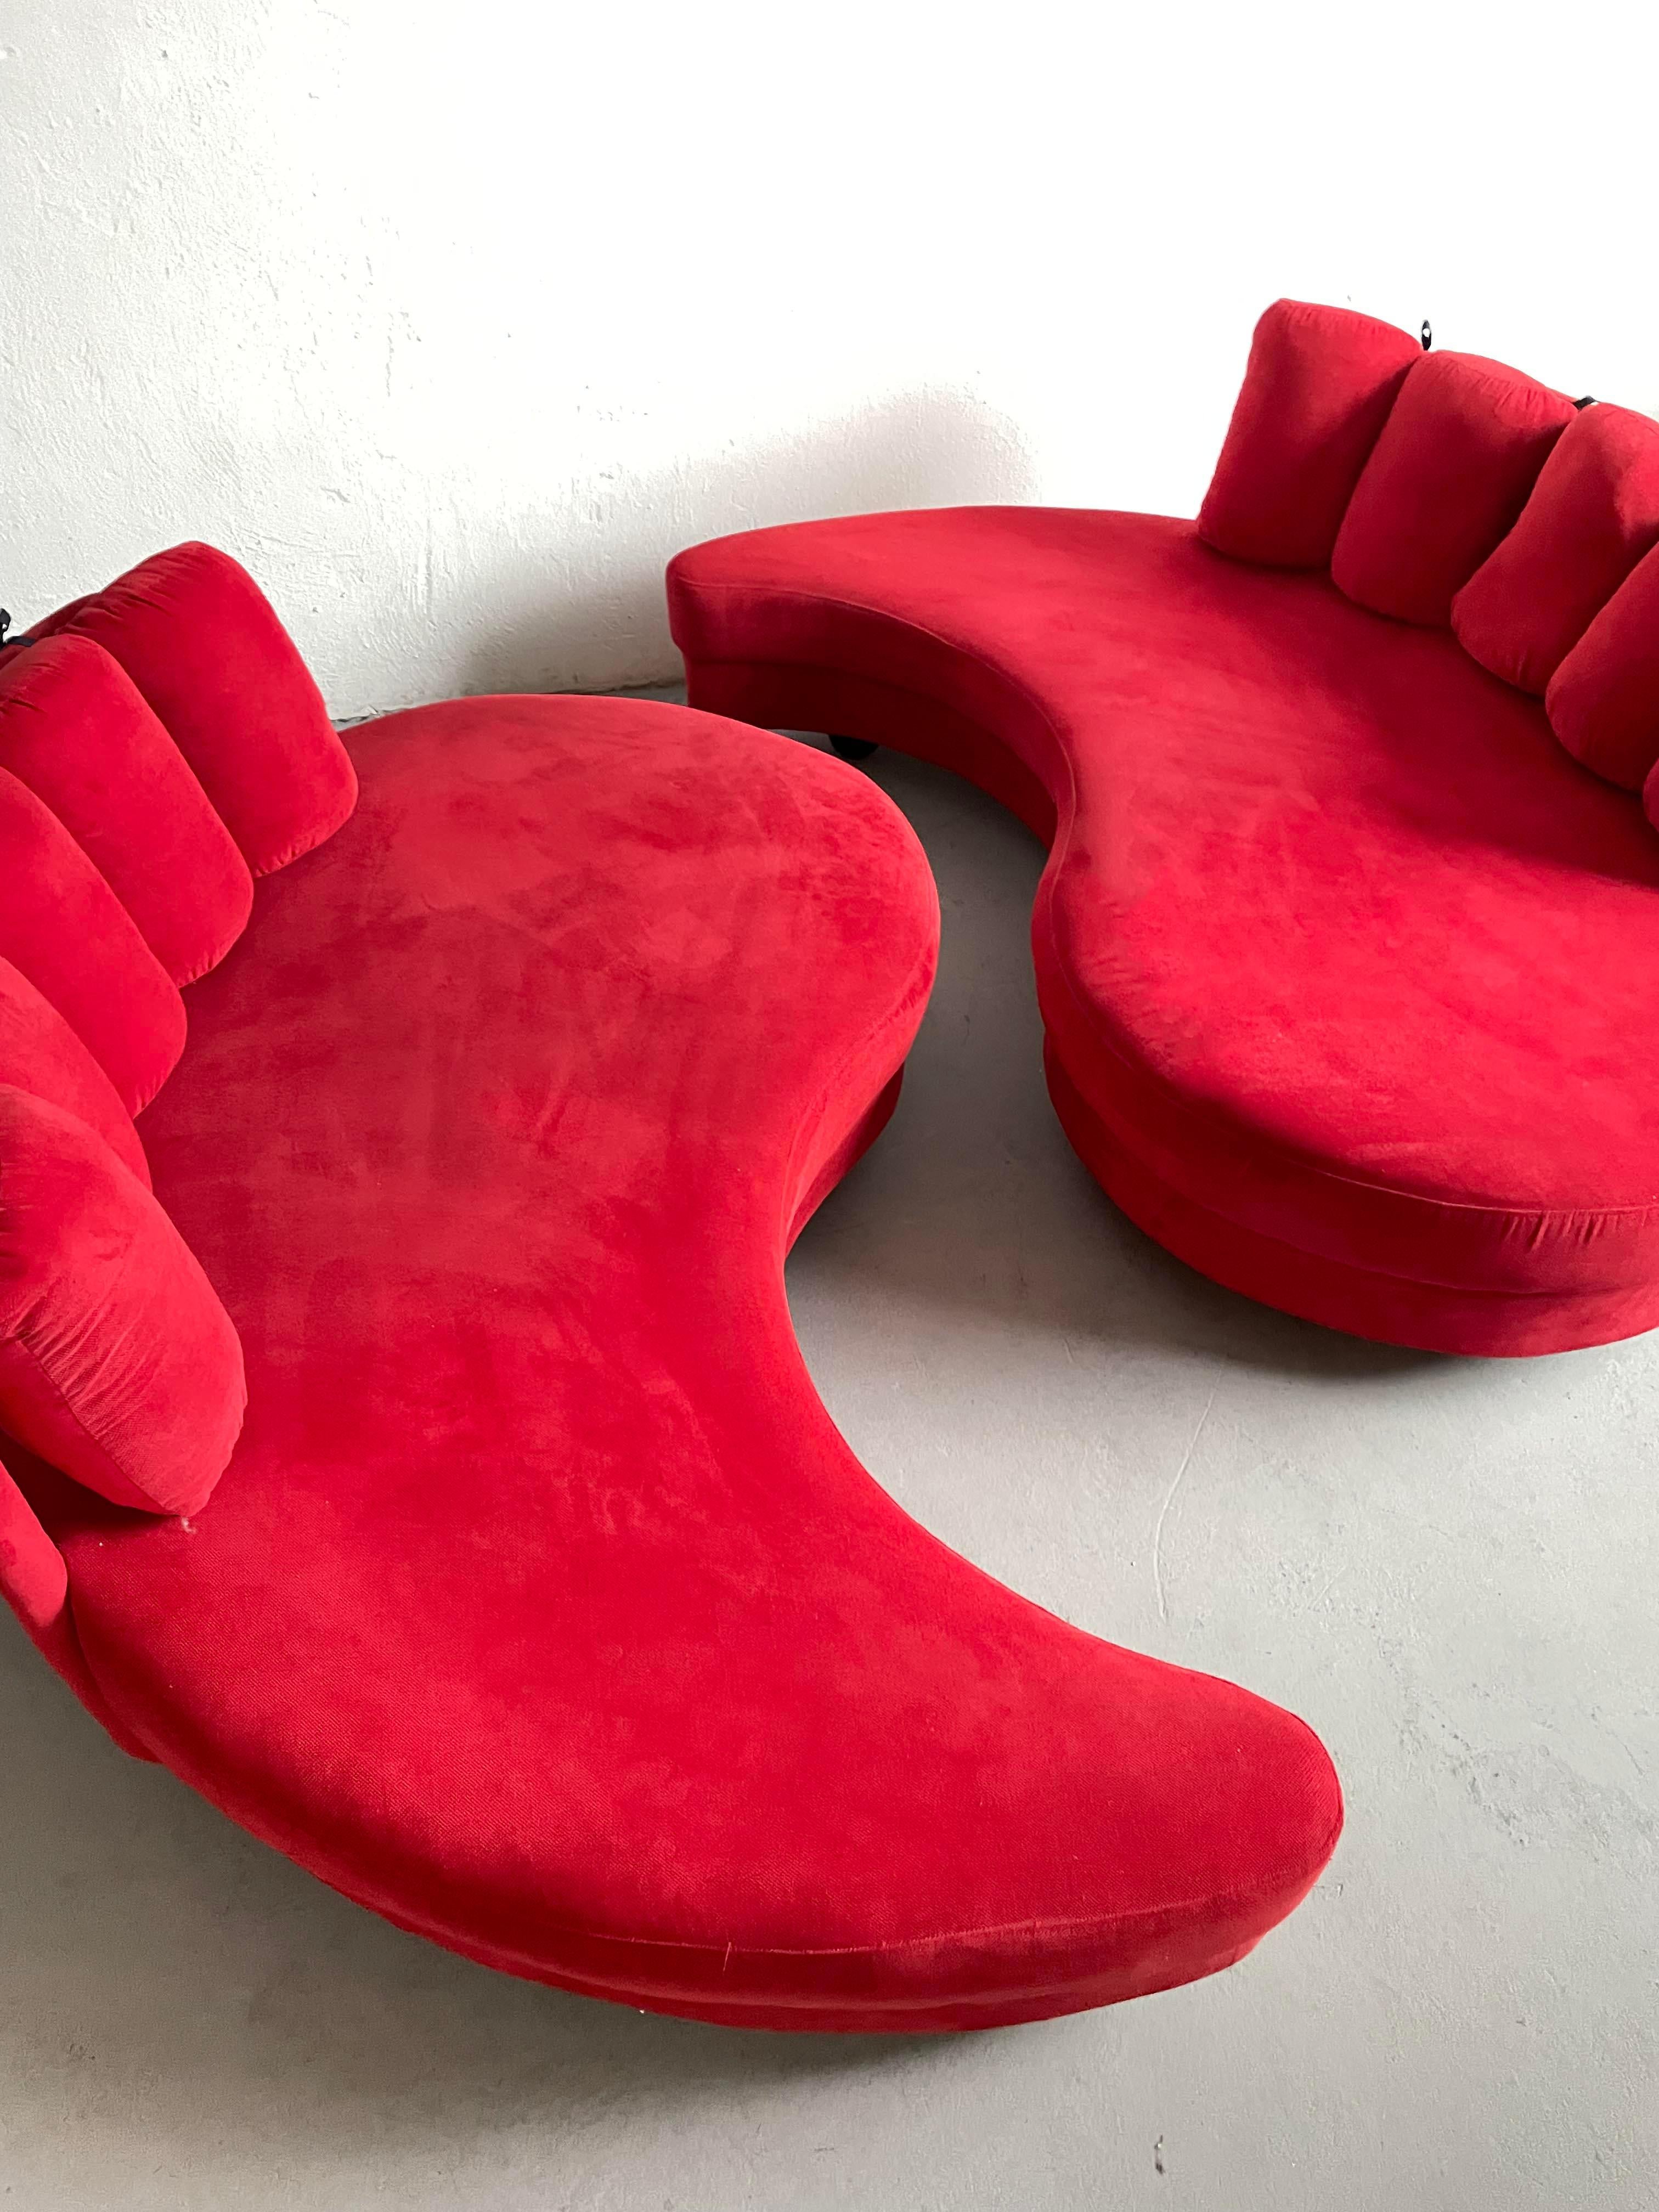 European Set of 2 Postmodern Curved Yin-Yang Shaped Sofa Daybeds in Red Fabric, c 1980s For Sale